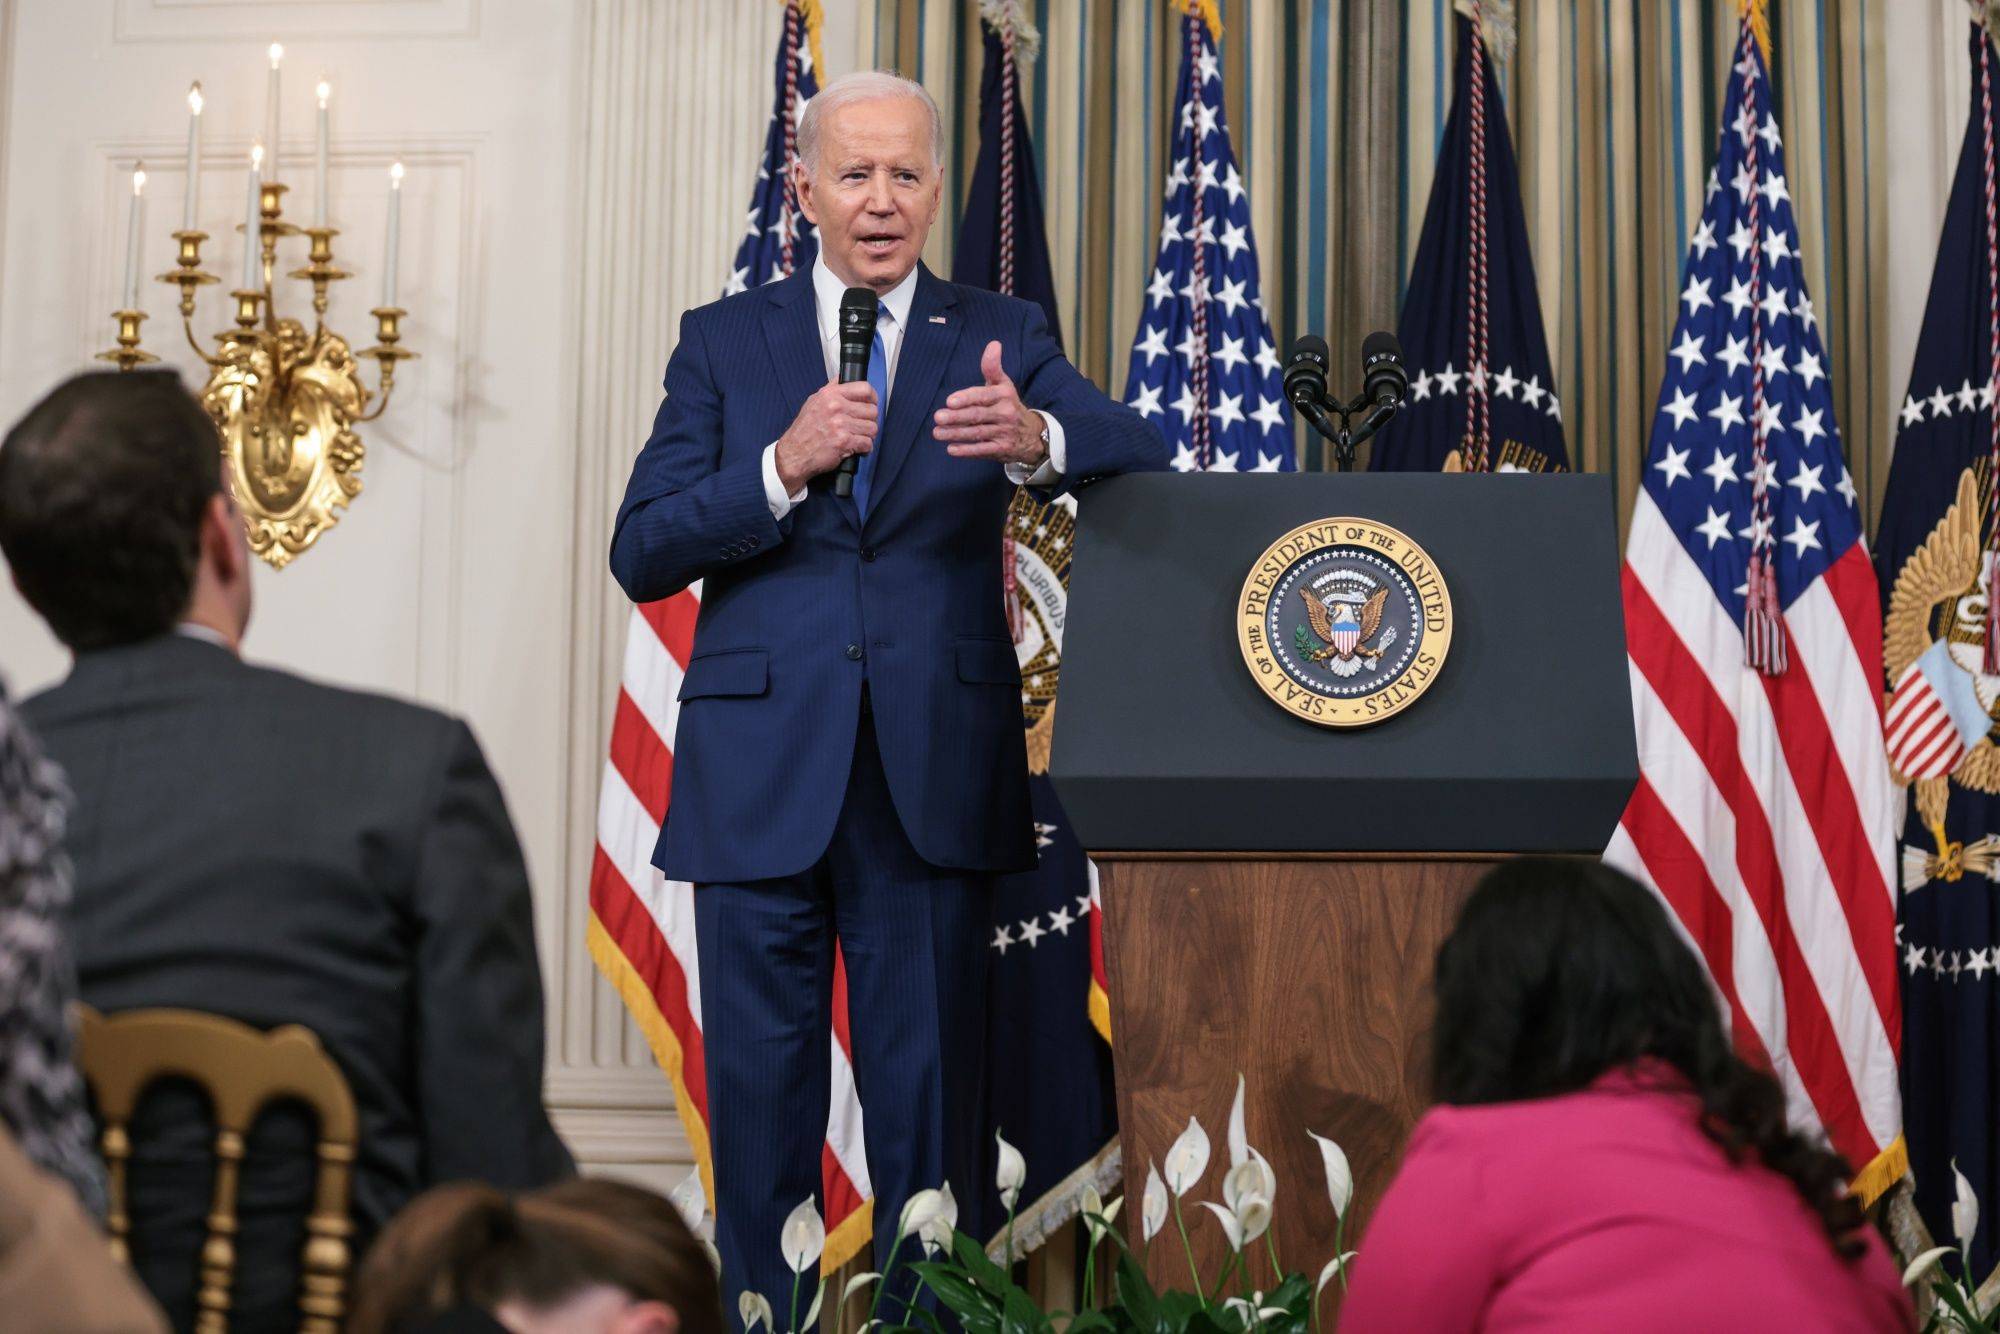 U.S. President Joe Biden on Wednesday addresses a news conference at the White following the midterm election in which his Democratic Party fared better than expected